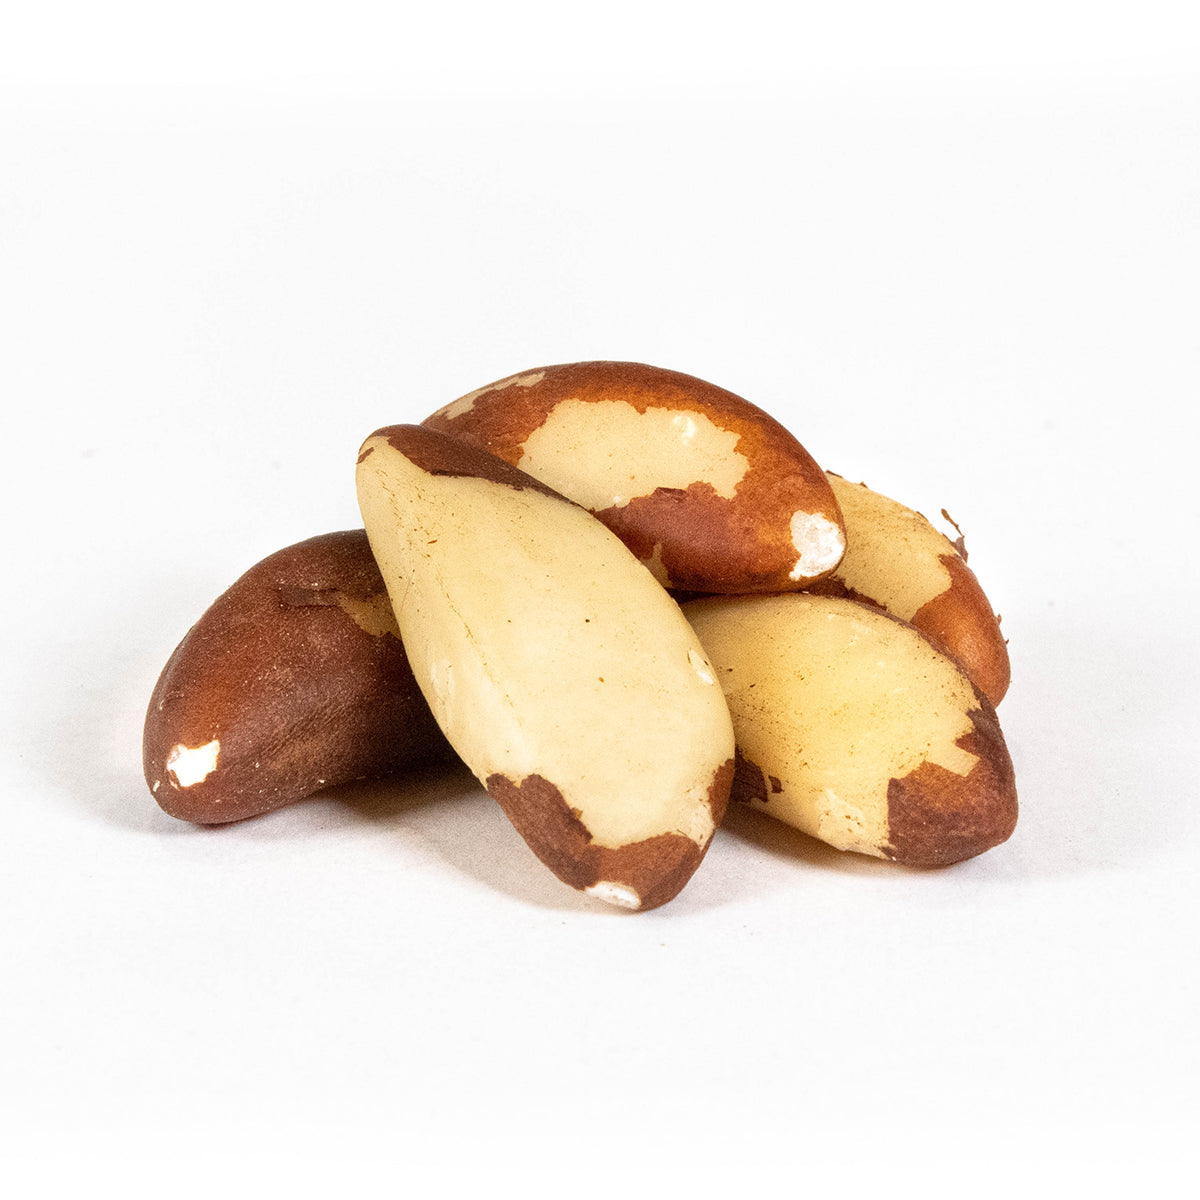 Are Brazil Nuts Good for You? Brazil Nuts Nutrition, Benefits, and